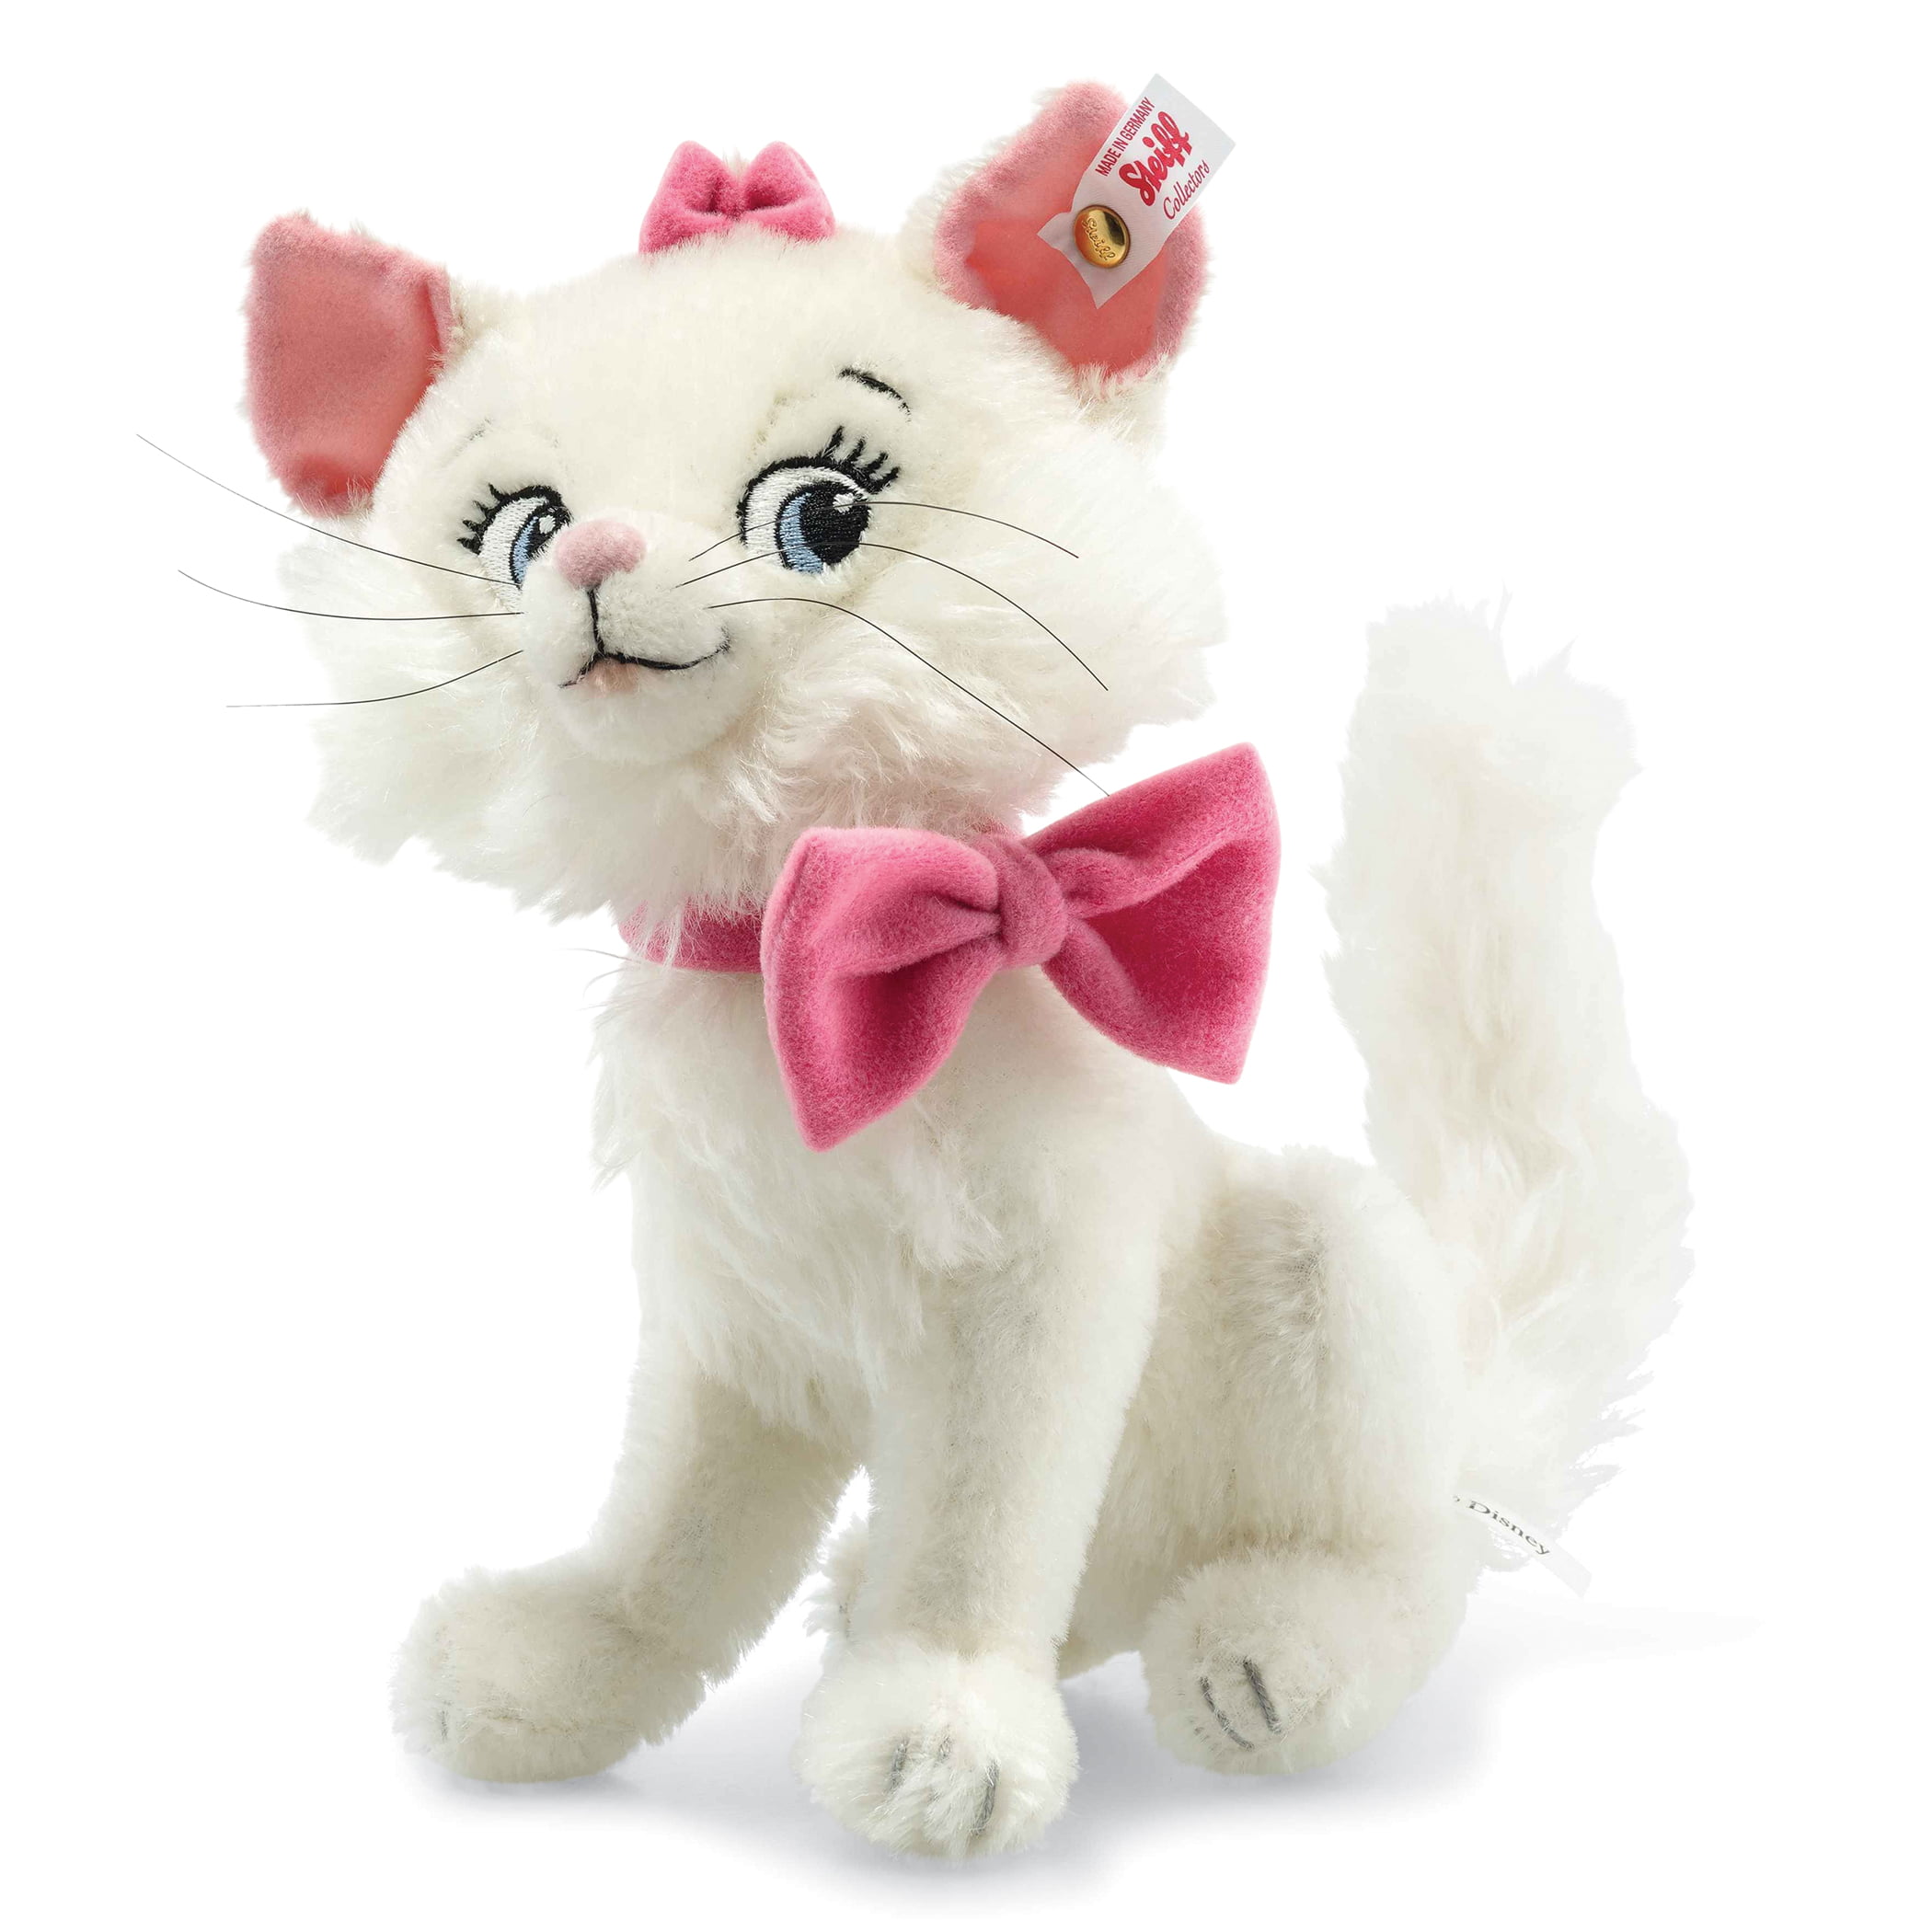 Marie Cat Kitten Aristocats Disney Plush White Pink Bow Stuffed Toy 11 Inc for sale online 